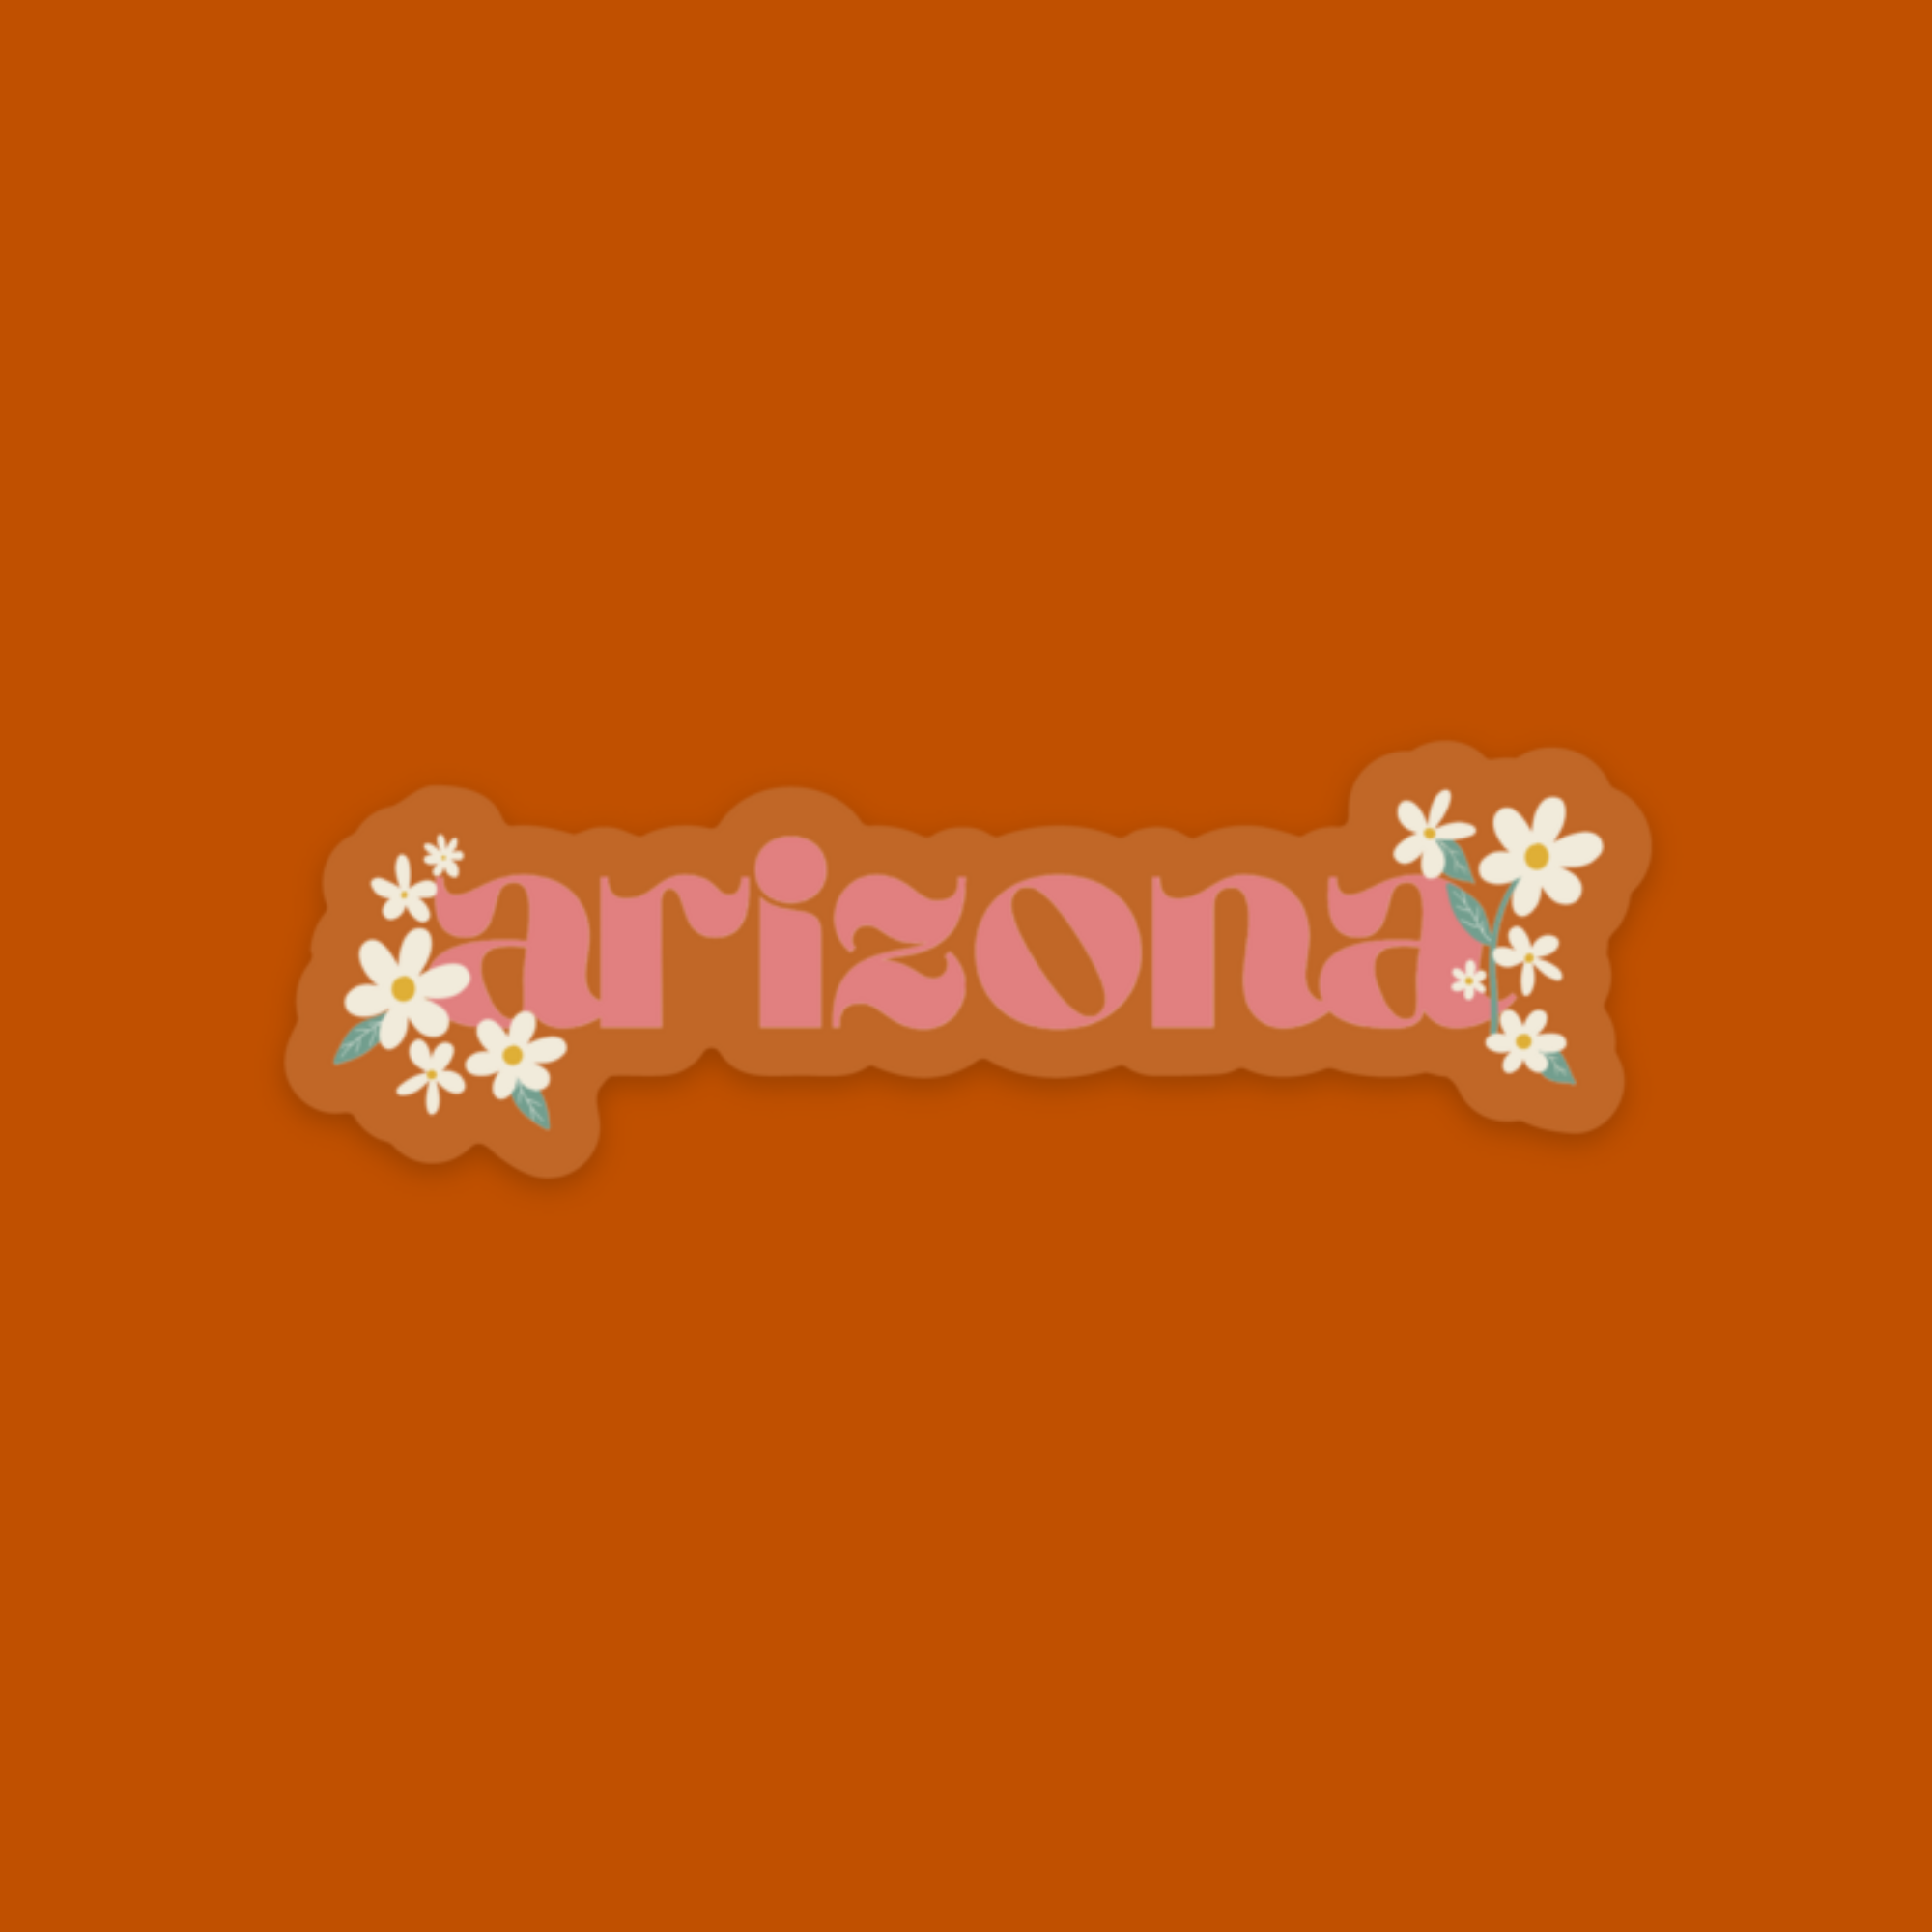 Die cut sticker with clear back and the word "arizona" surrounded by daisies shown on an orange background color to display transparency